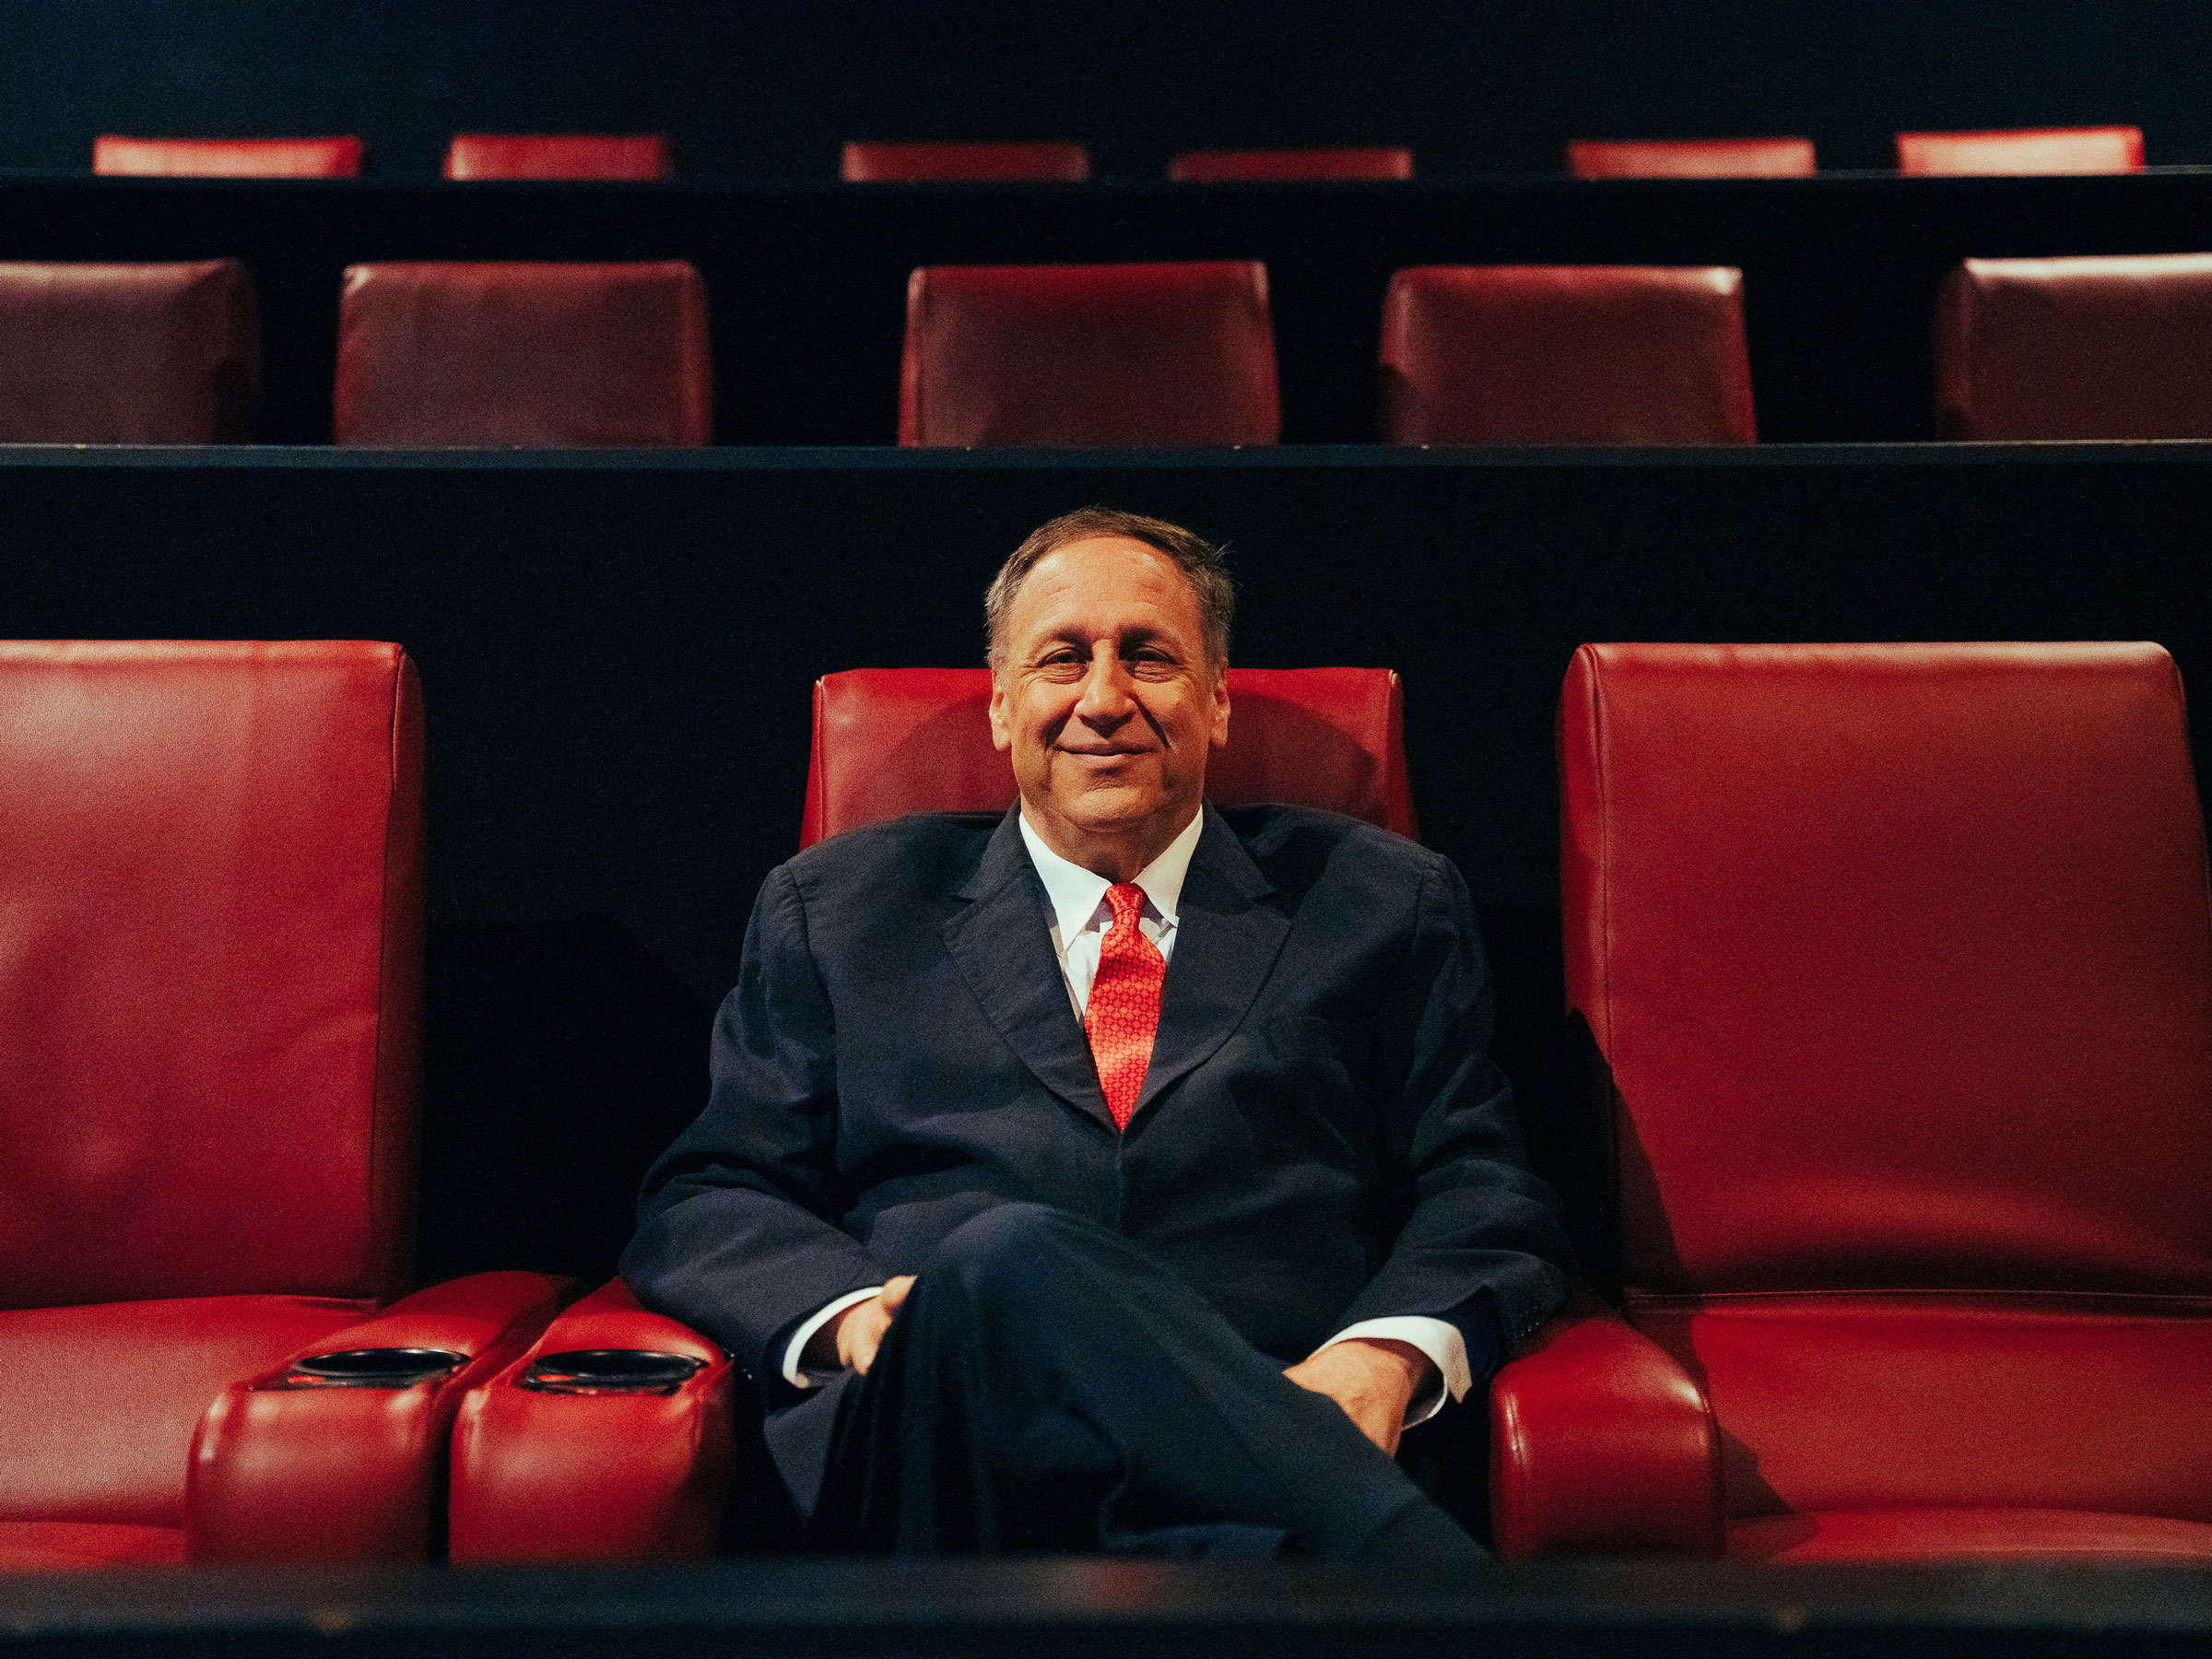 Adam Aron, the chief executive of AMC Entertainment, at one of the company's theaters in Leawood, Kansas, on Sept. 25, 2020. (Barrett Emke—The New York Times/Redux)